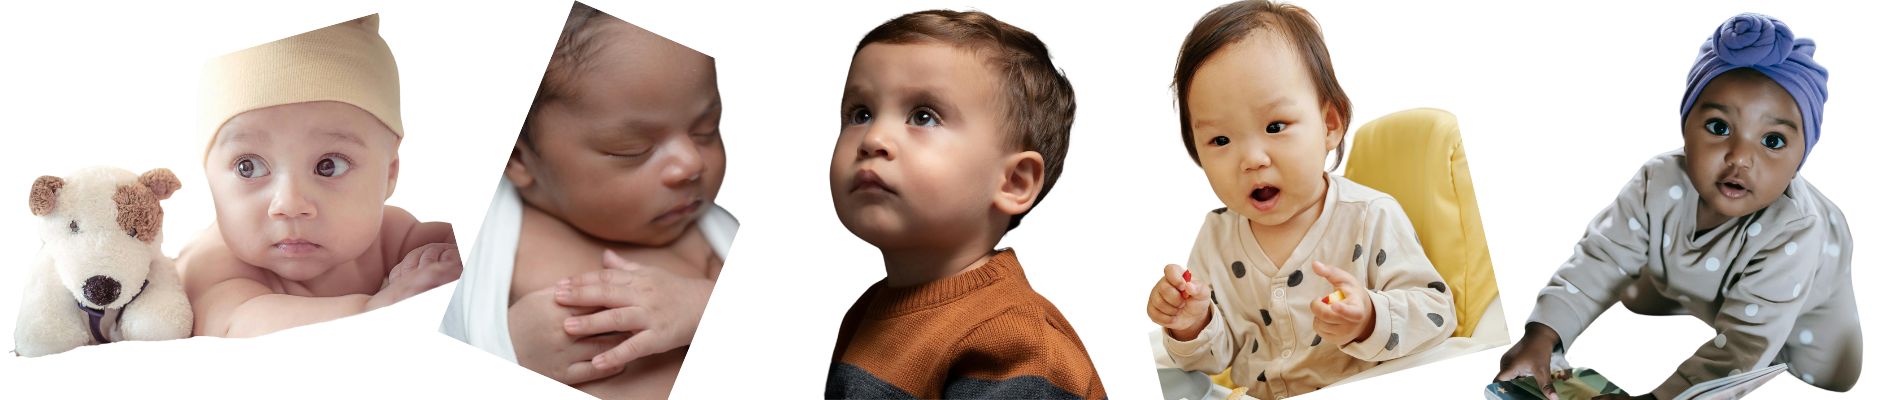 Infants and Toddlers Products Header